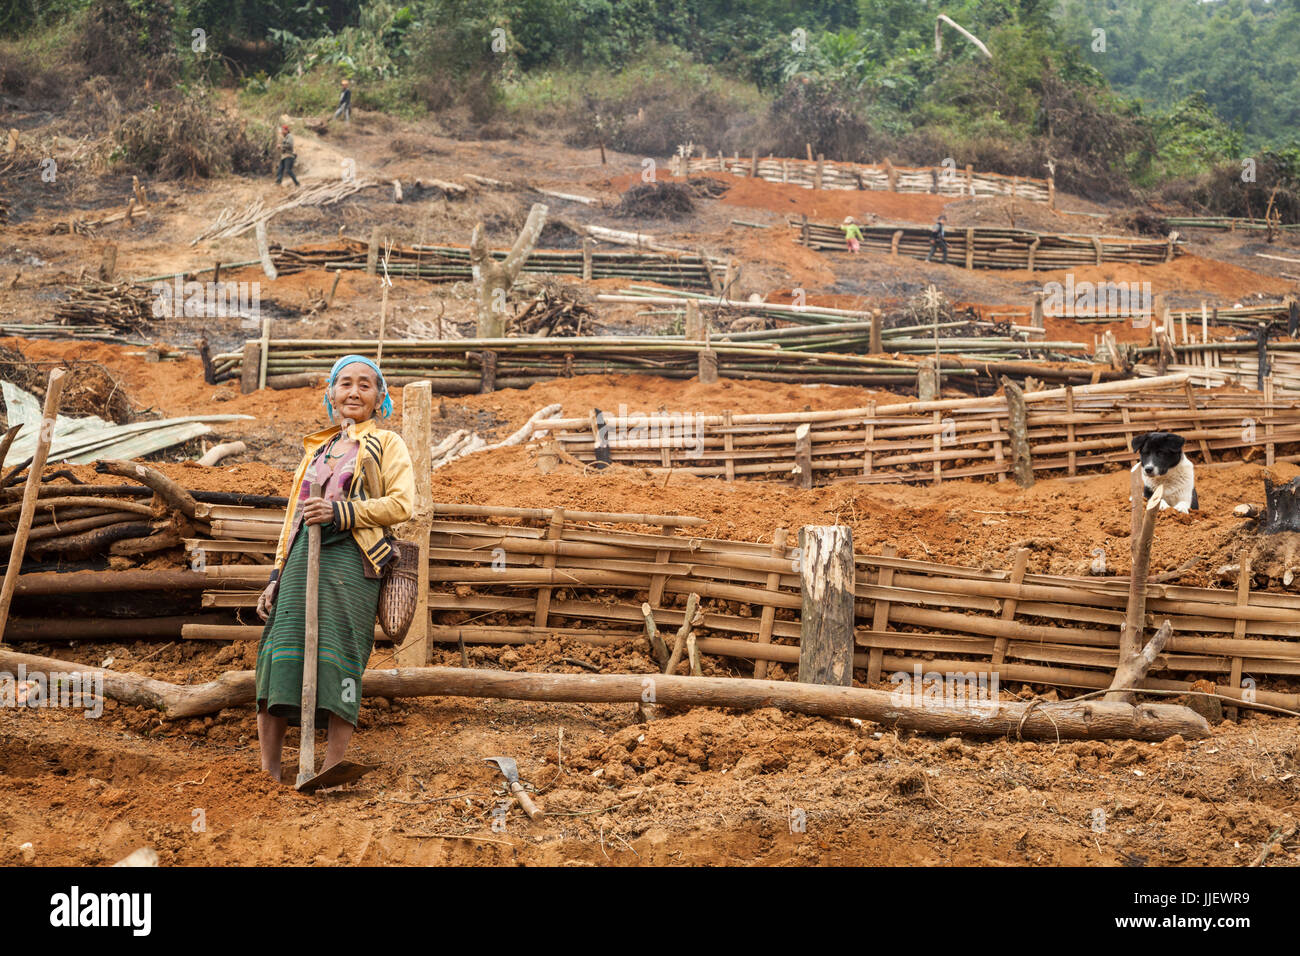 An elderly woman stands at the base of a series of building platforms, held by bamboo scaffolding, at the temporary relocation site above Muang Va, Laos. The village will be completely inundated by Nam Ou River Dam #6 and the government provided resettlement near Hat Sa will not be completed in time. Stock Photo